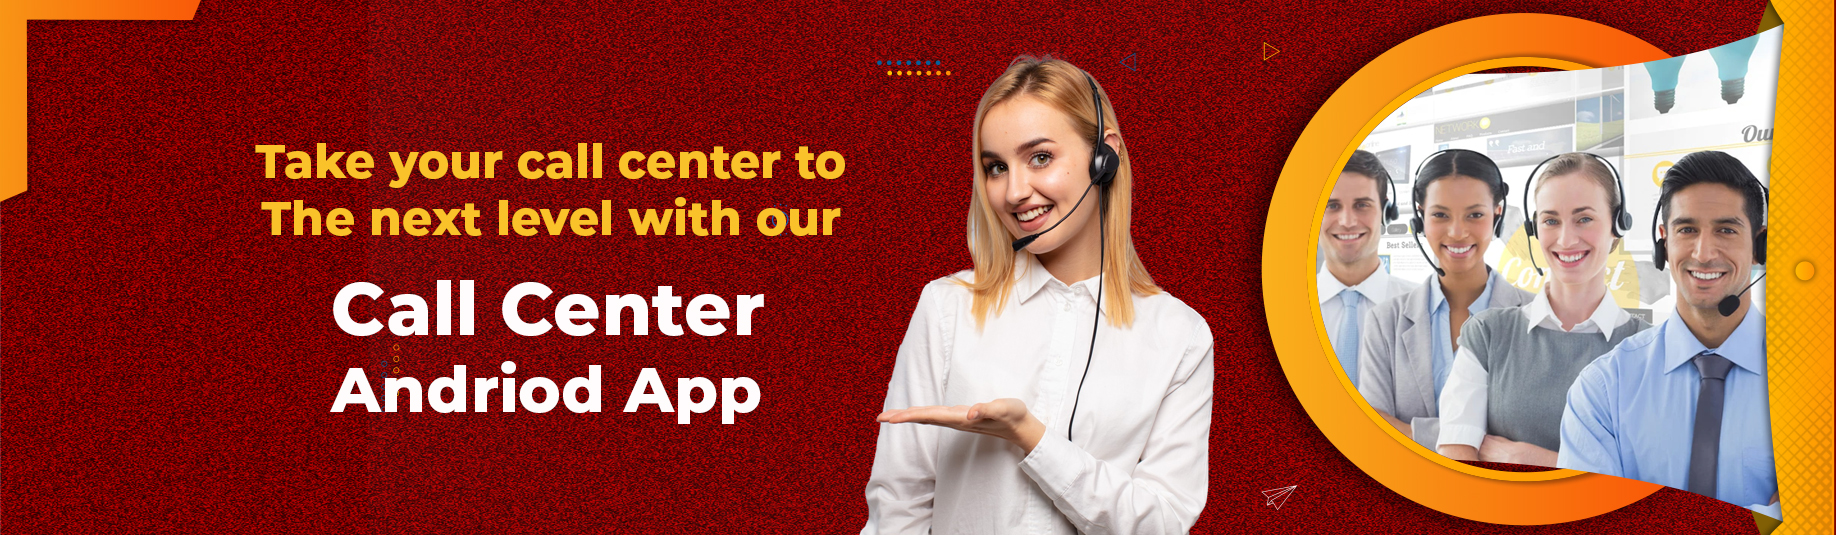 Manage calls, scheduling, and customer service with our all-in-one call center app